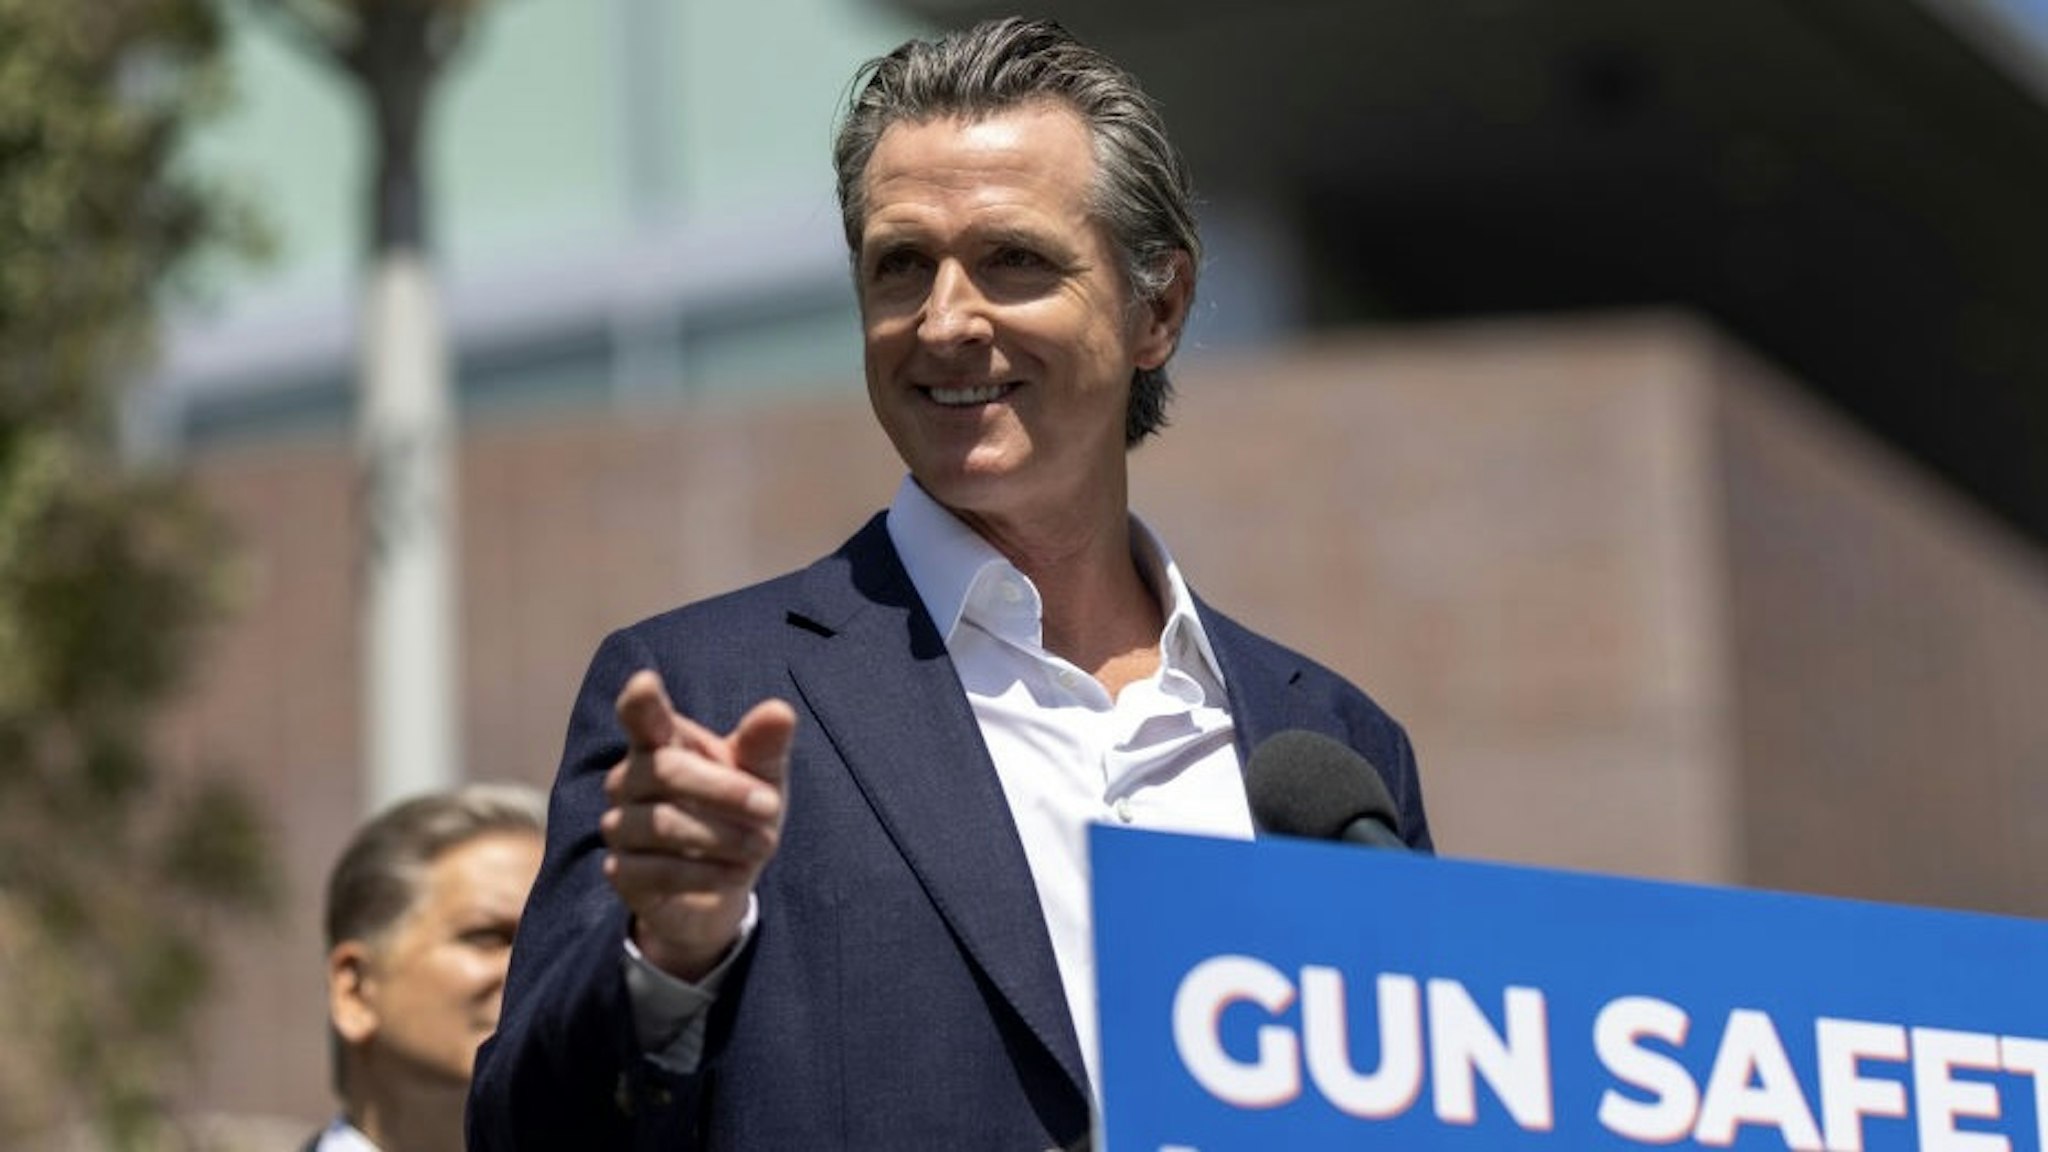 California Gov. Newsom Highlights New State Efforts To Stem Gun Violence LOS ANGELES, CA - JULY 22: California governor Gavin Newsom addresses a news conference where he signed SB 1327 into law on July 22, 2022 in Los Angeles, California. During the conference, Newsom signed SB 1327, which allows private individuals to sue one another for the illegal manufacture or sale of guns in California, using the principal that the Supreme Court allows for Texas in pursuing people who have had or helped in an abortion. Following a series of high-profile mass shootings across the nation, the governor has signed a set of bills establishing laws meant to reduce gun violence. Included are laws restricting ghost guns, a 10-year prohibition on gun possession for individuals convicted of child or elder abuse, and prohibiting gun the industry from advertising to minors. Gun violence is the leading cause of death among children in the U.S., and in Los Angeles, 30 percent of shootings involve ghost guns. (Photo by David McNew/Getty Images) David McNew / Contributor